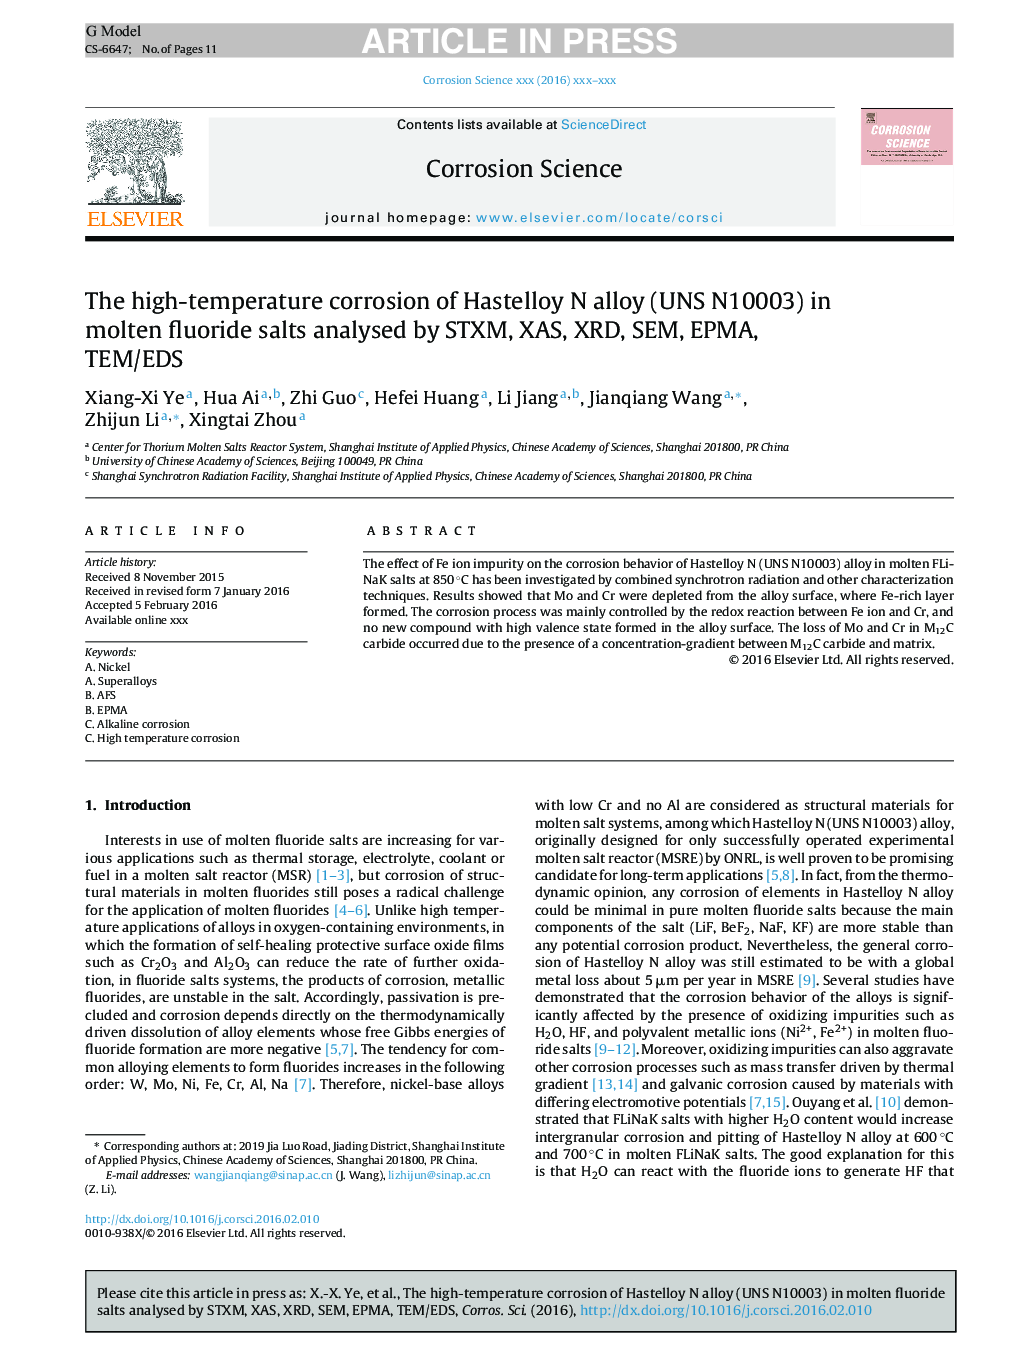 The high-temperature corrosion of Hastelloy N alloy (UNS N10003) in molten fluoride salts analysed by STXM, XAS, XRD, SEM, EPMA, TEM/EDS